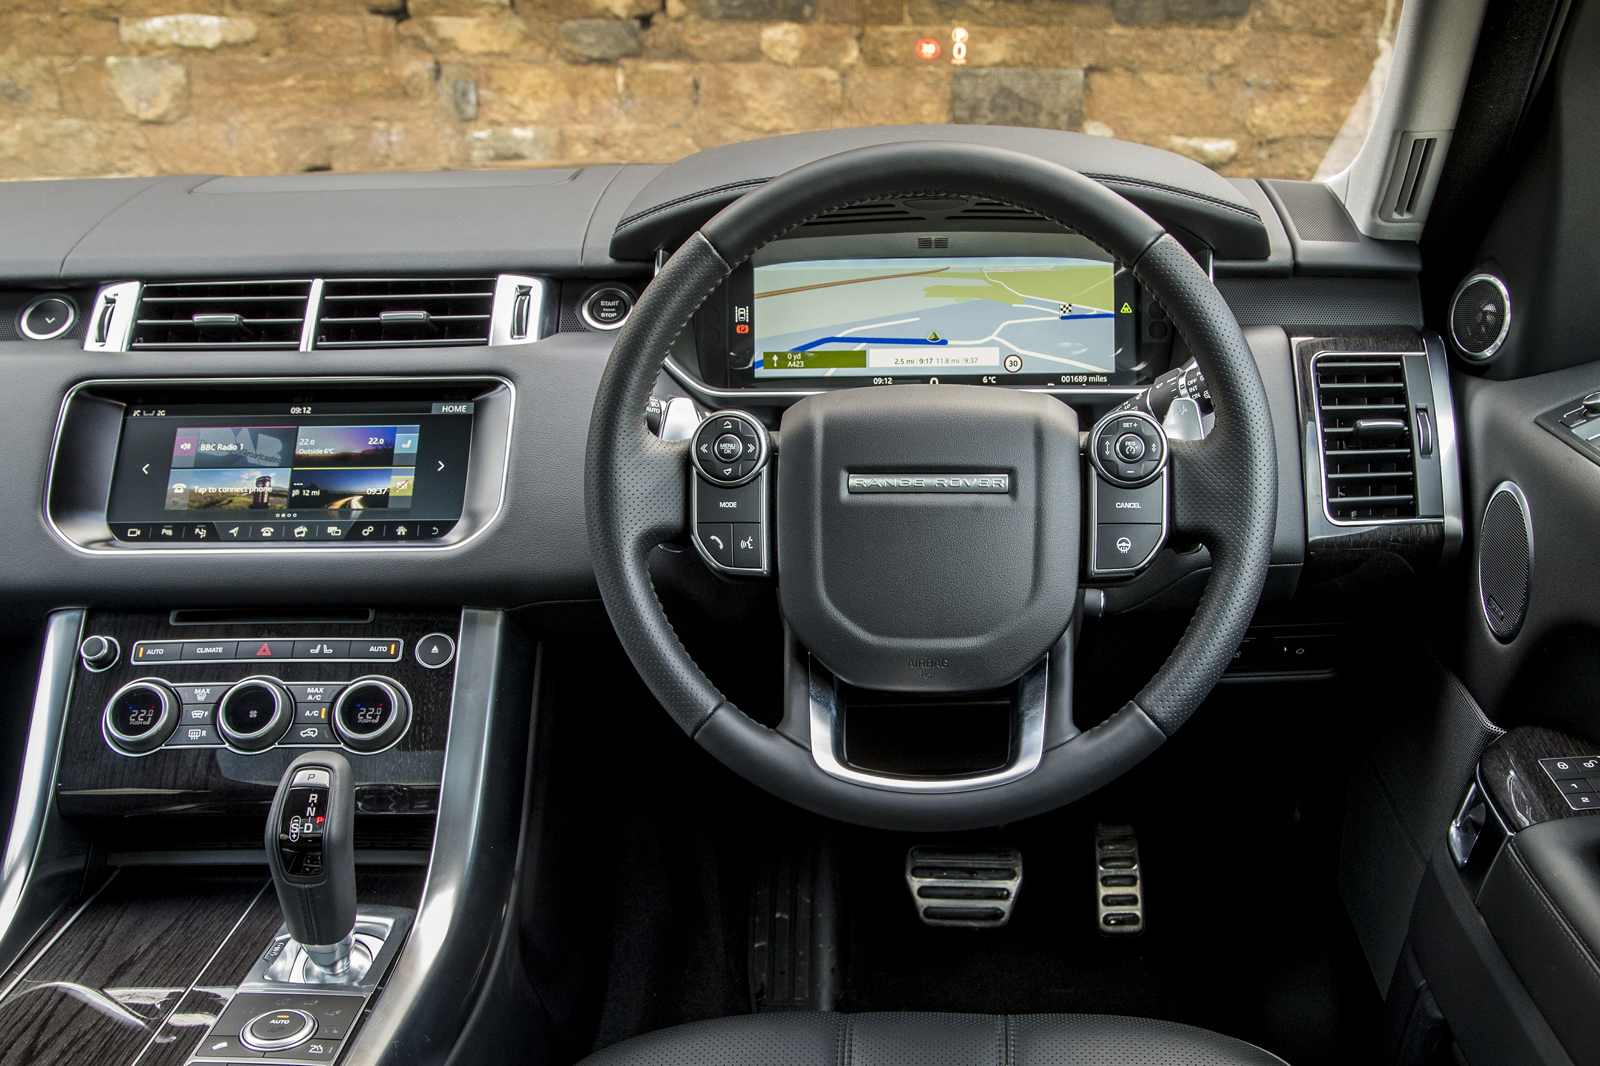 File:2017 Land Rover Range Rover Autobiography LWB Interior.jpg - Wikimedia  Commons